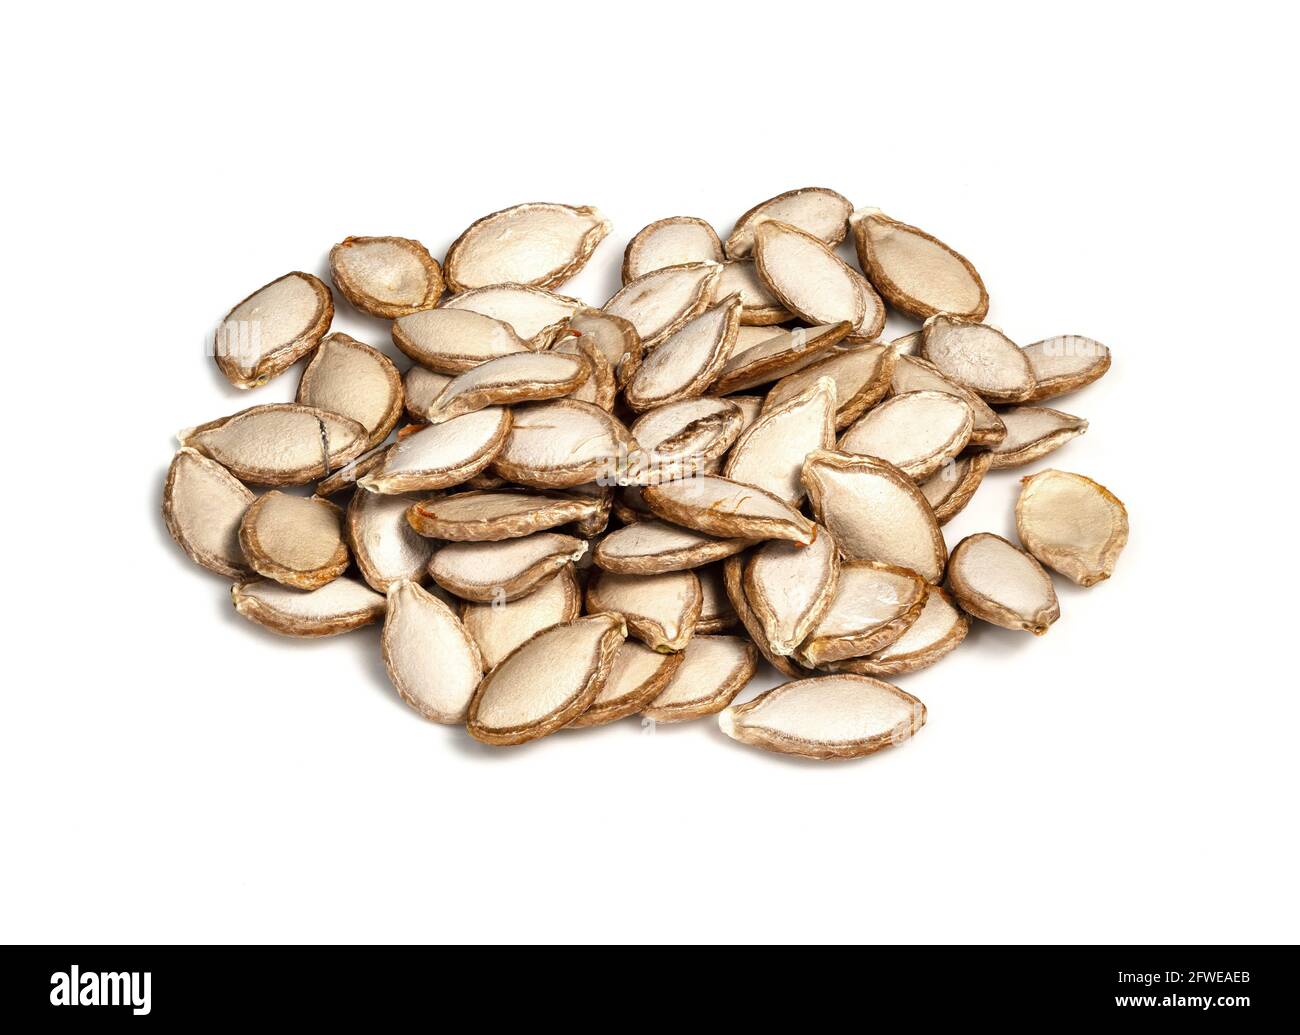 pile of unhusked Pumpkin seeds closeup on white background Stock Photo